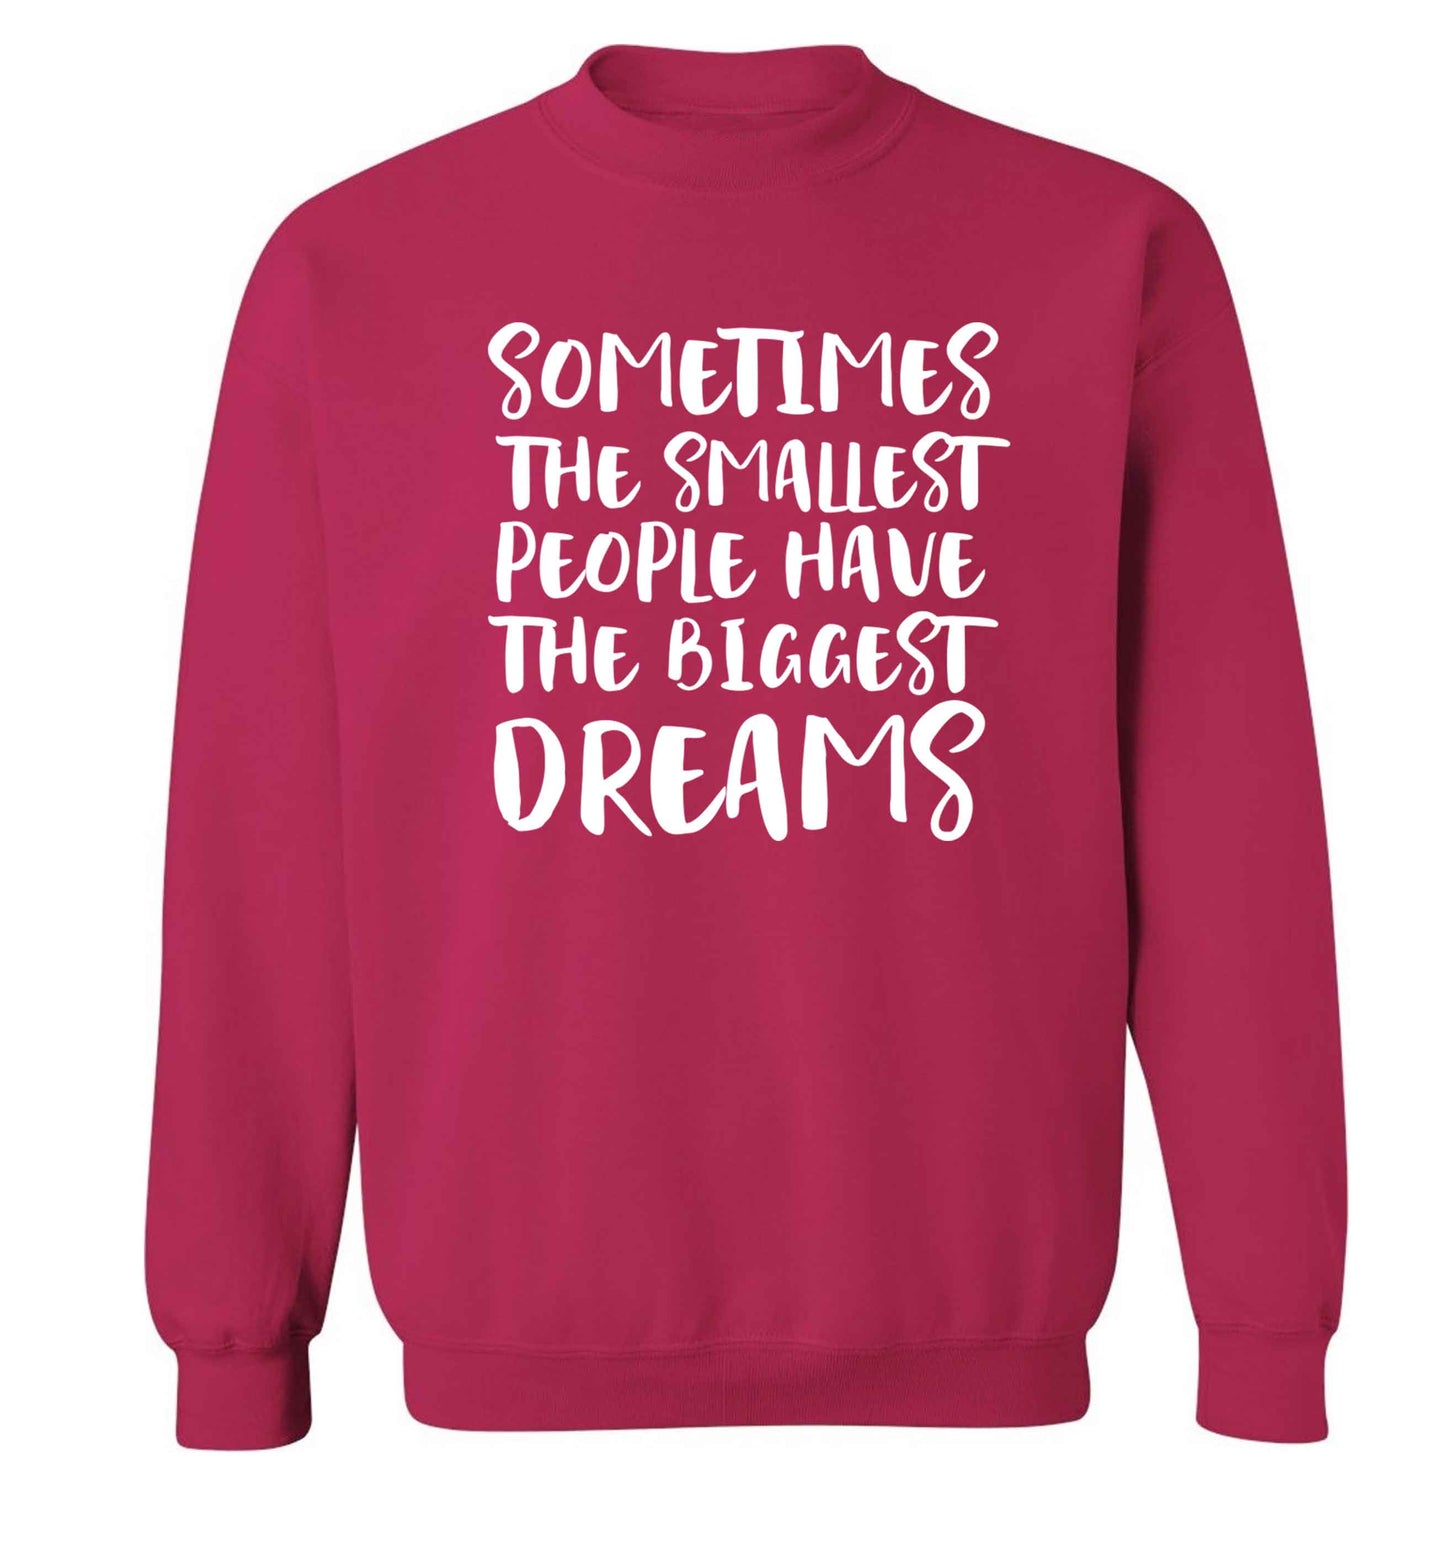 Sometimes the smallest people have the biggest dreams Adult's unisex pink Sweater 2XL